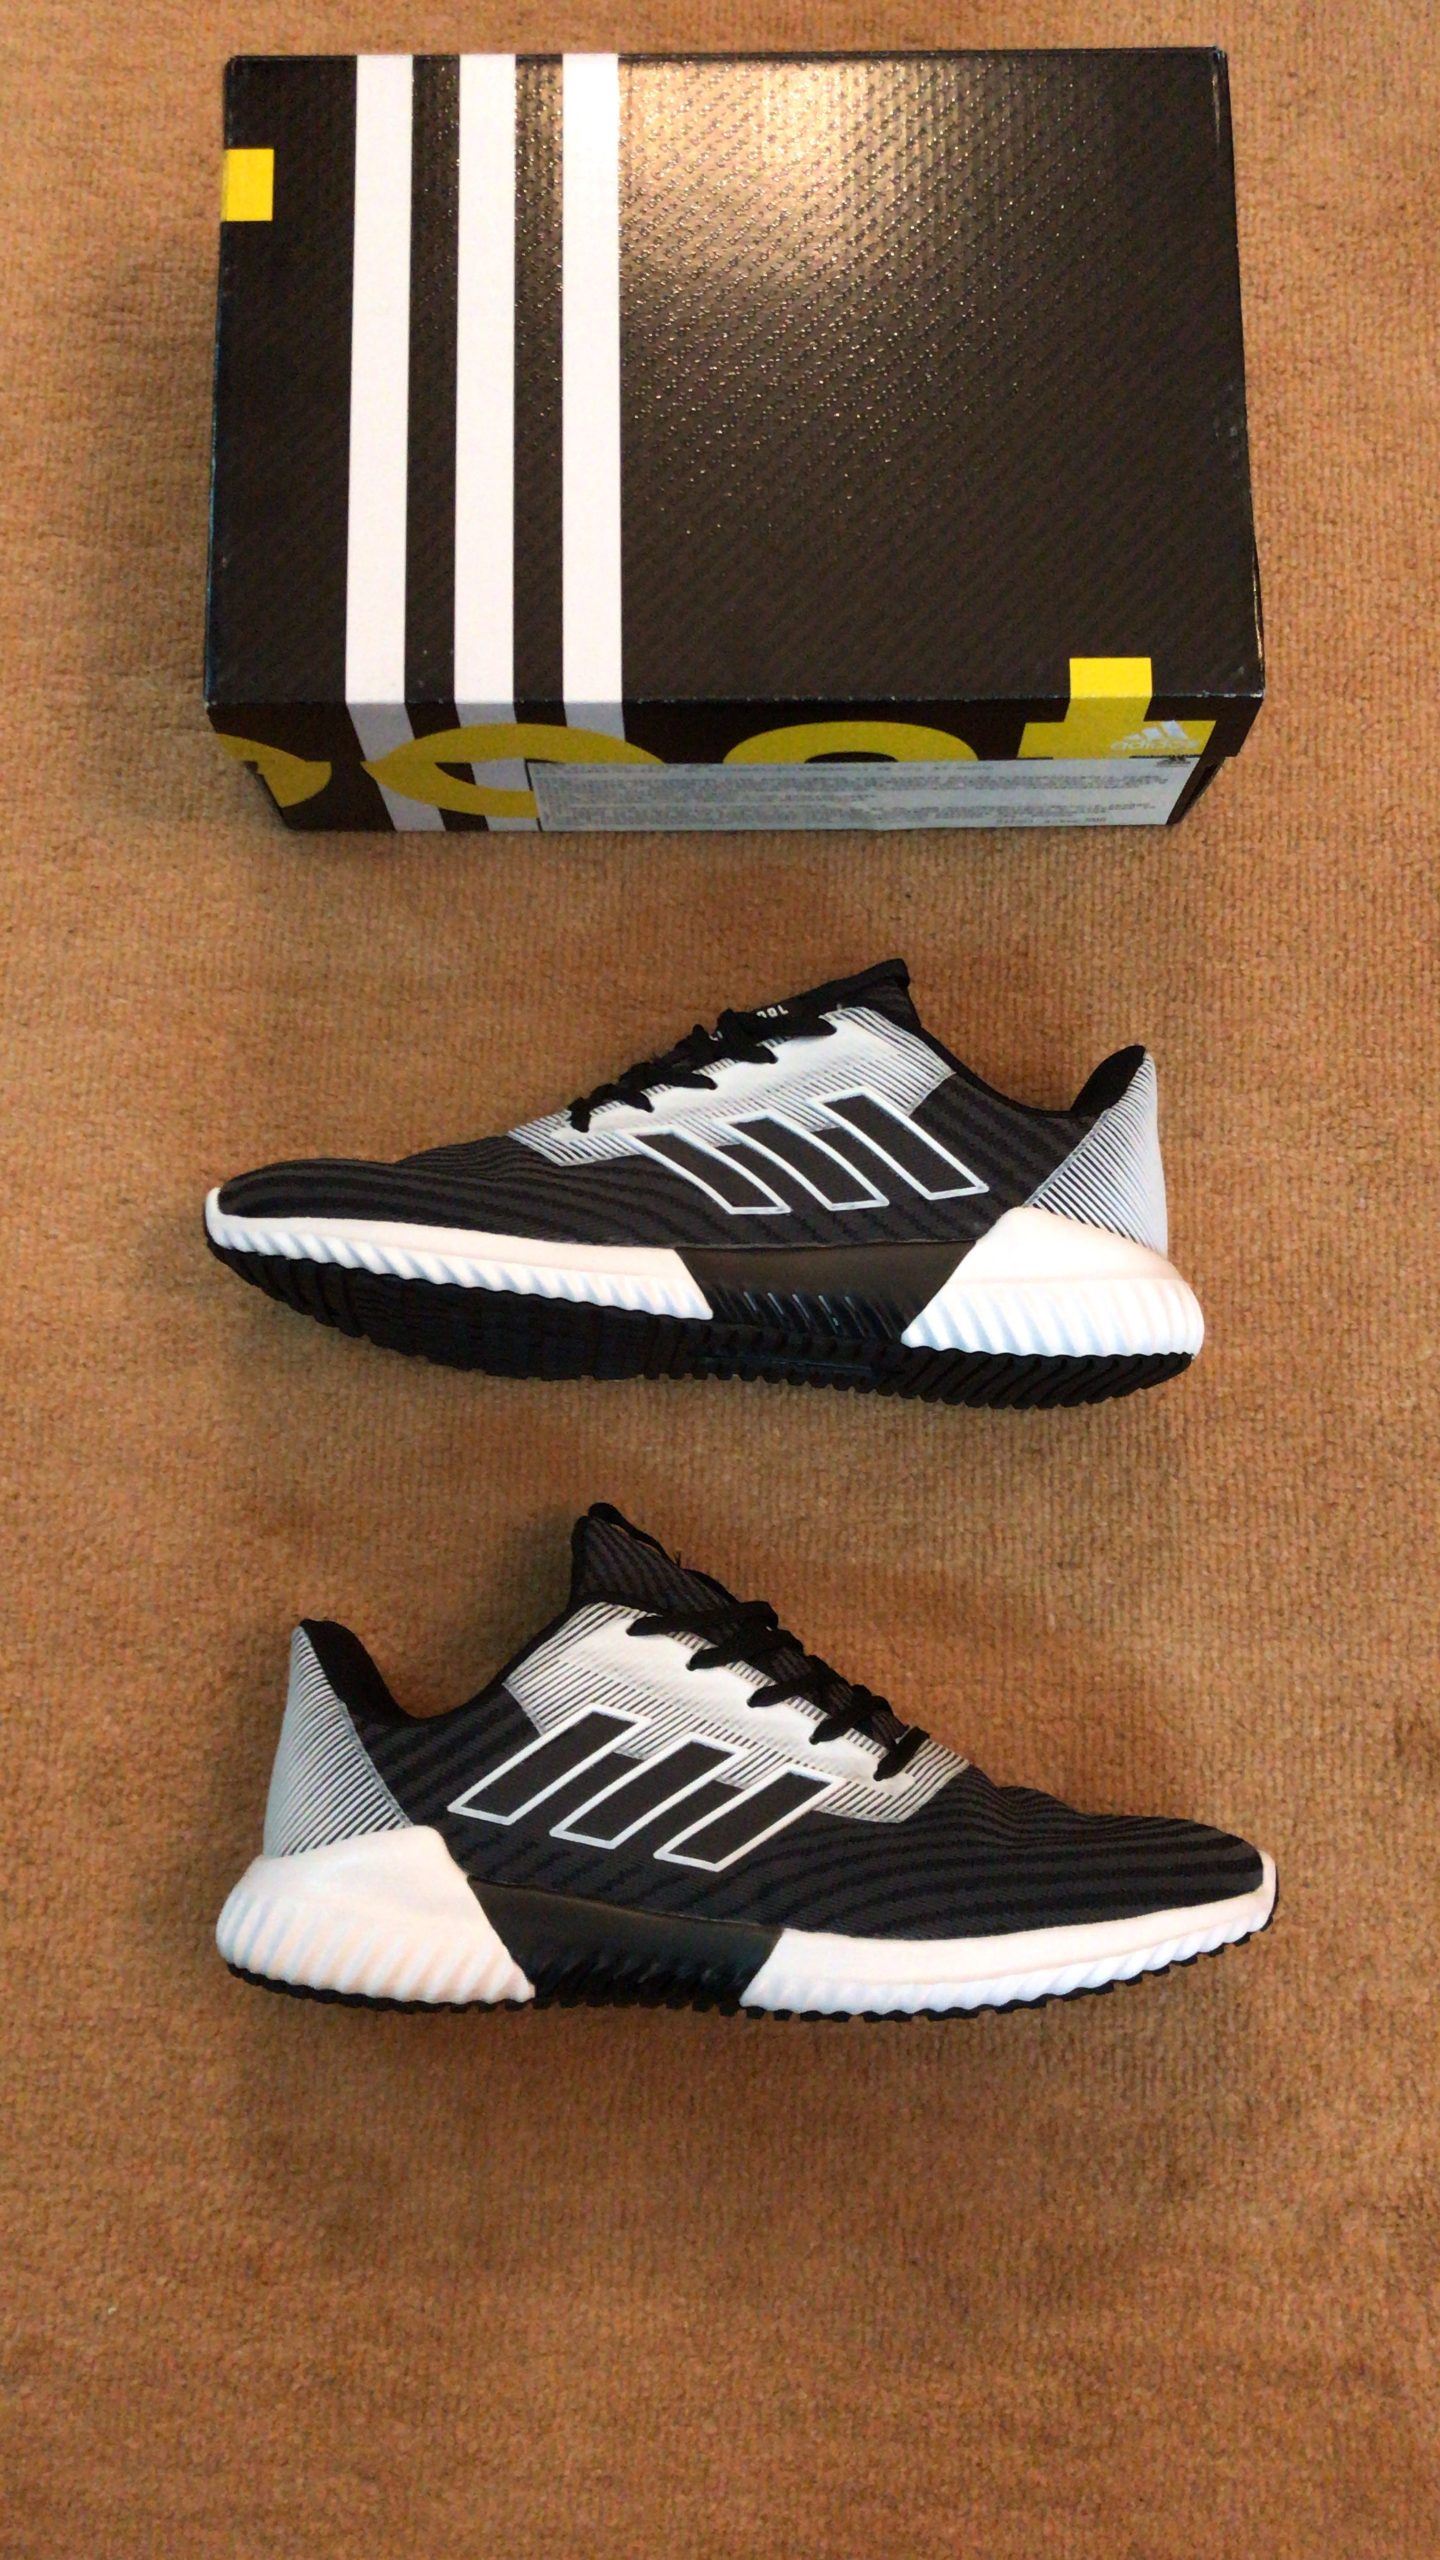 Adidas Climacool Sneakers (Multi)